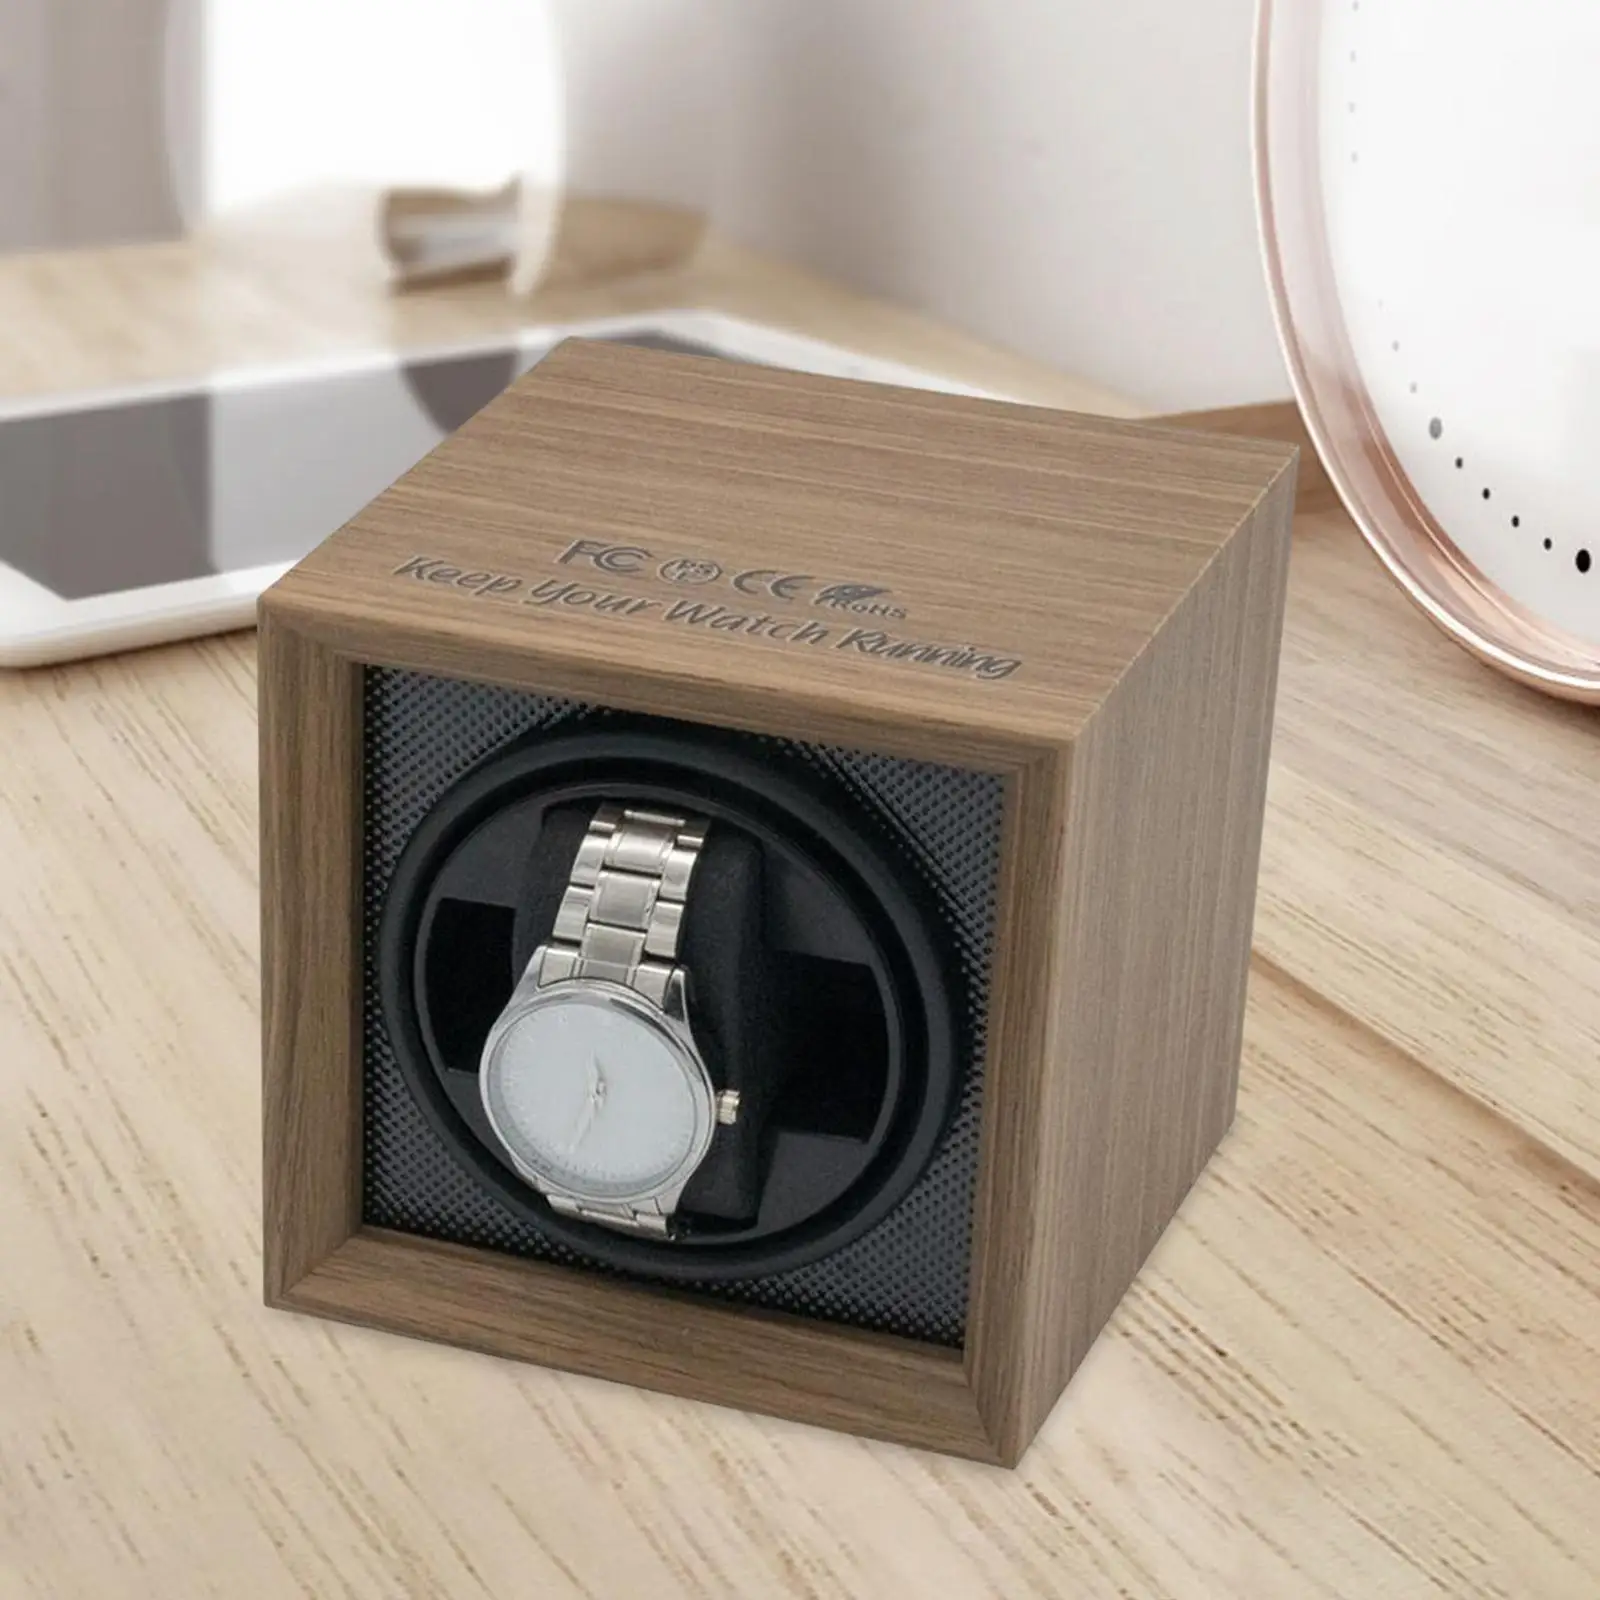 Automatic Single Watch Winder Winding Automatic Rotation Watch Case for Men and Women Watches